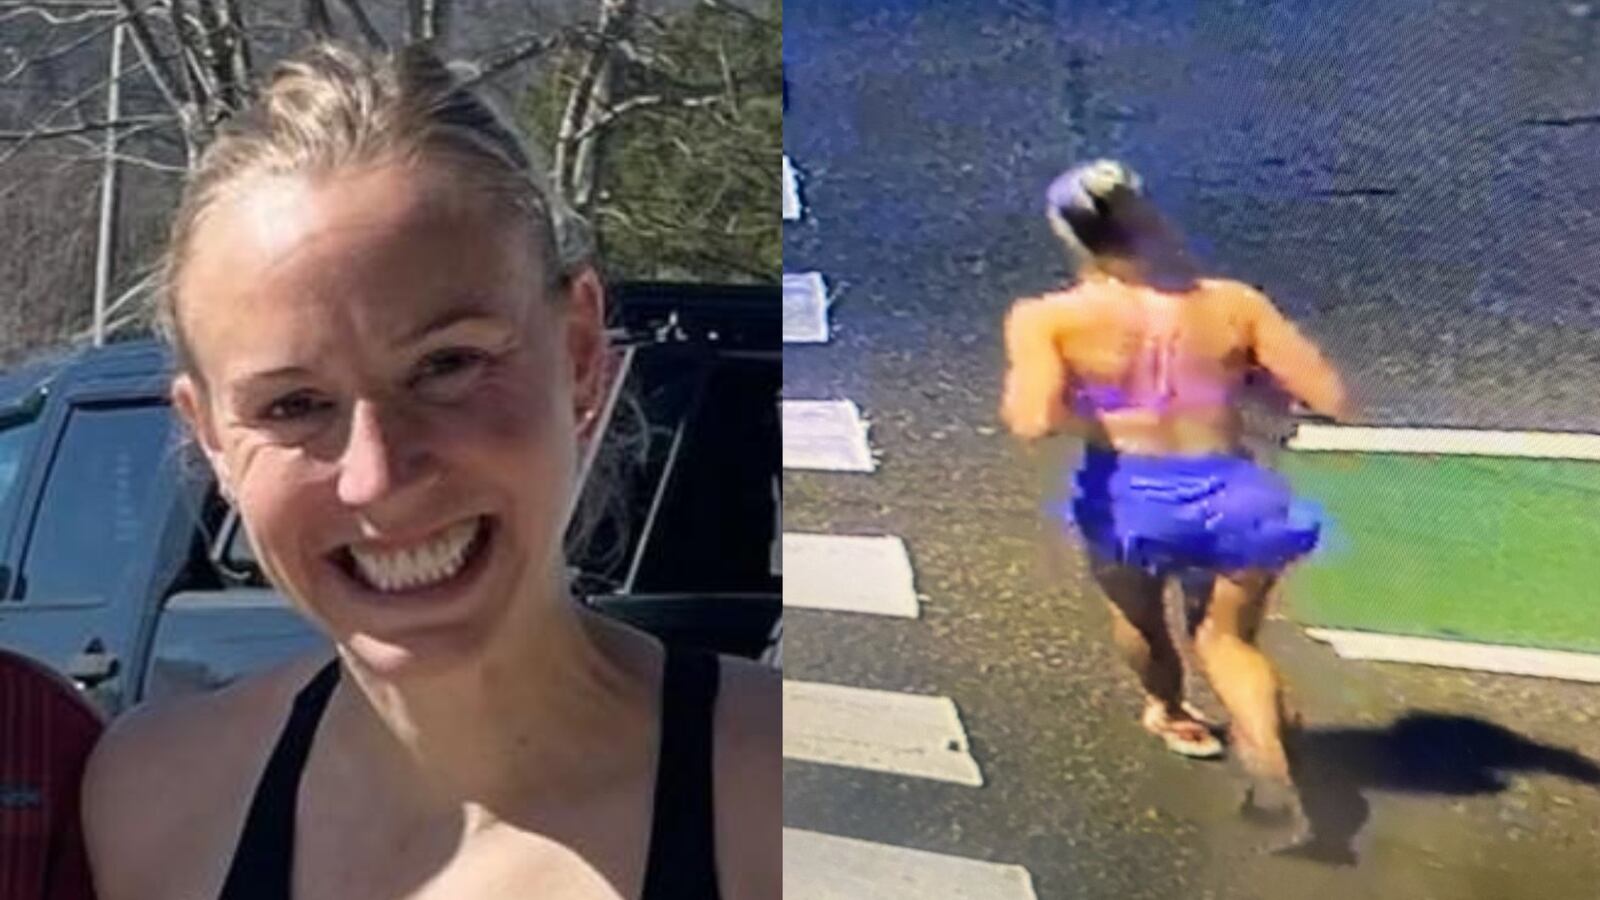 $50,000 reward offered to help find mother kidnapped while jogging near University of Memphis – FOX13 News Memphis